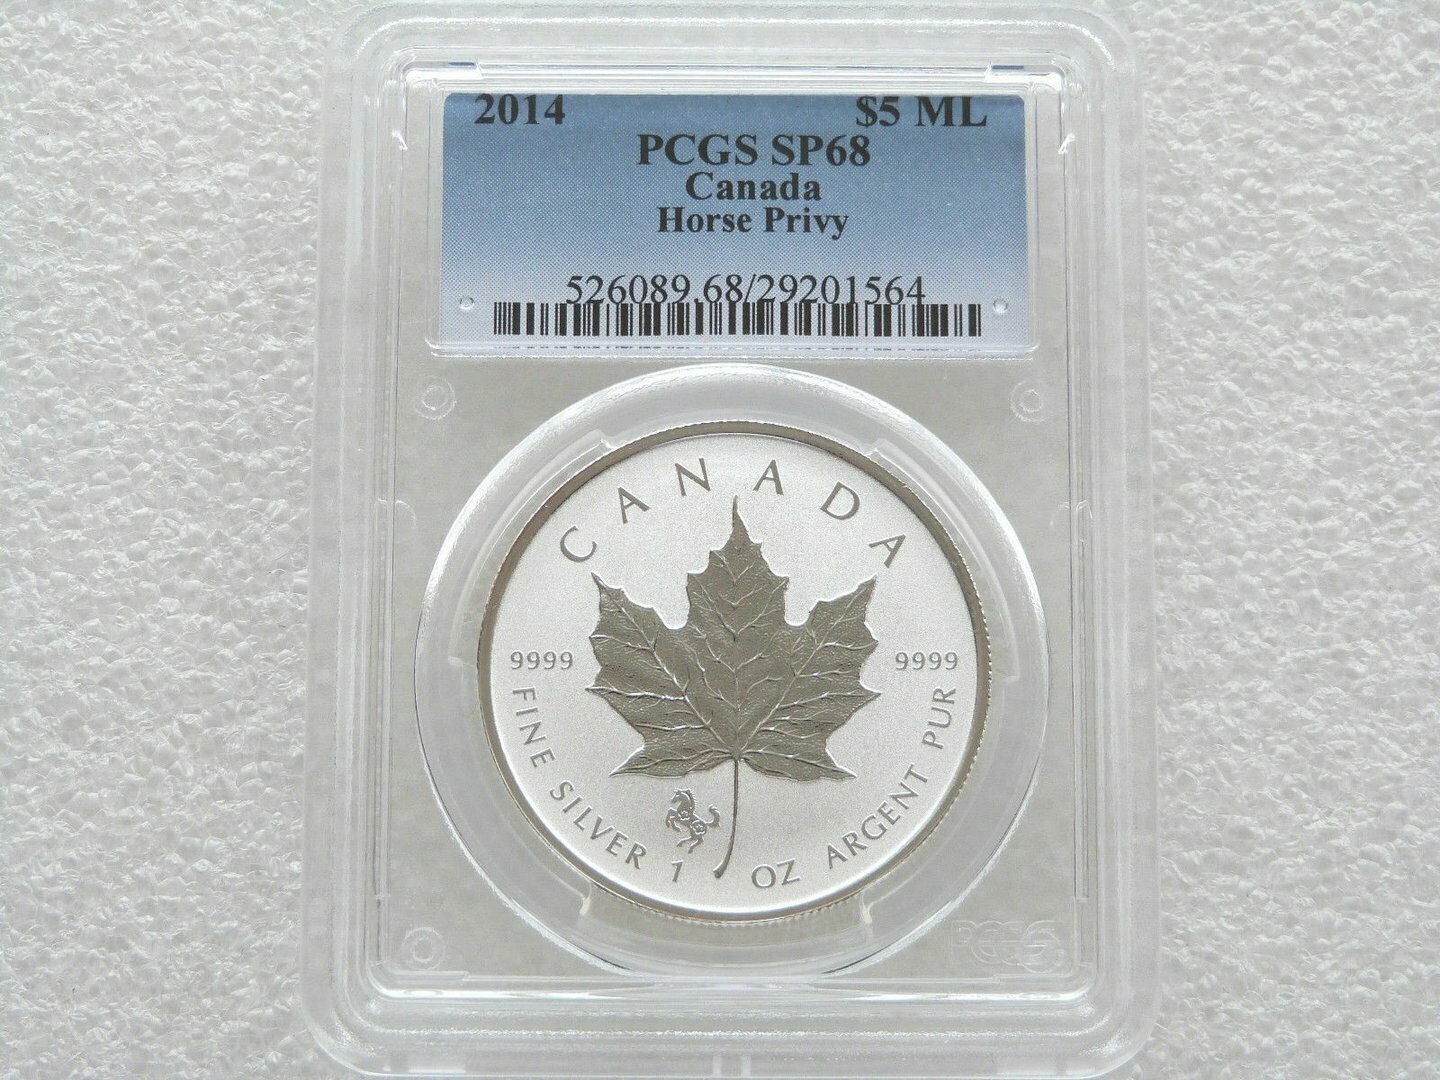 2014 Canada Maple Leaf Horse Privy $5 Silver Reverse Proof 1oz Coin PCGS SP68